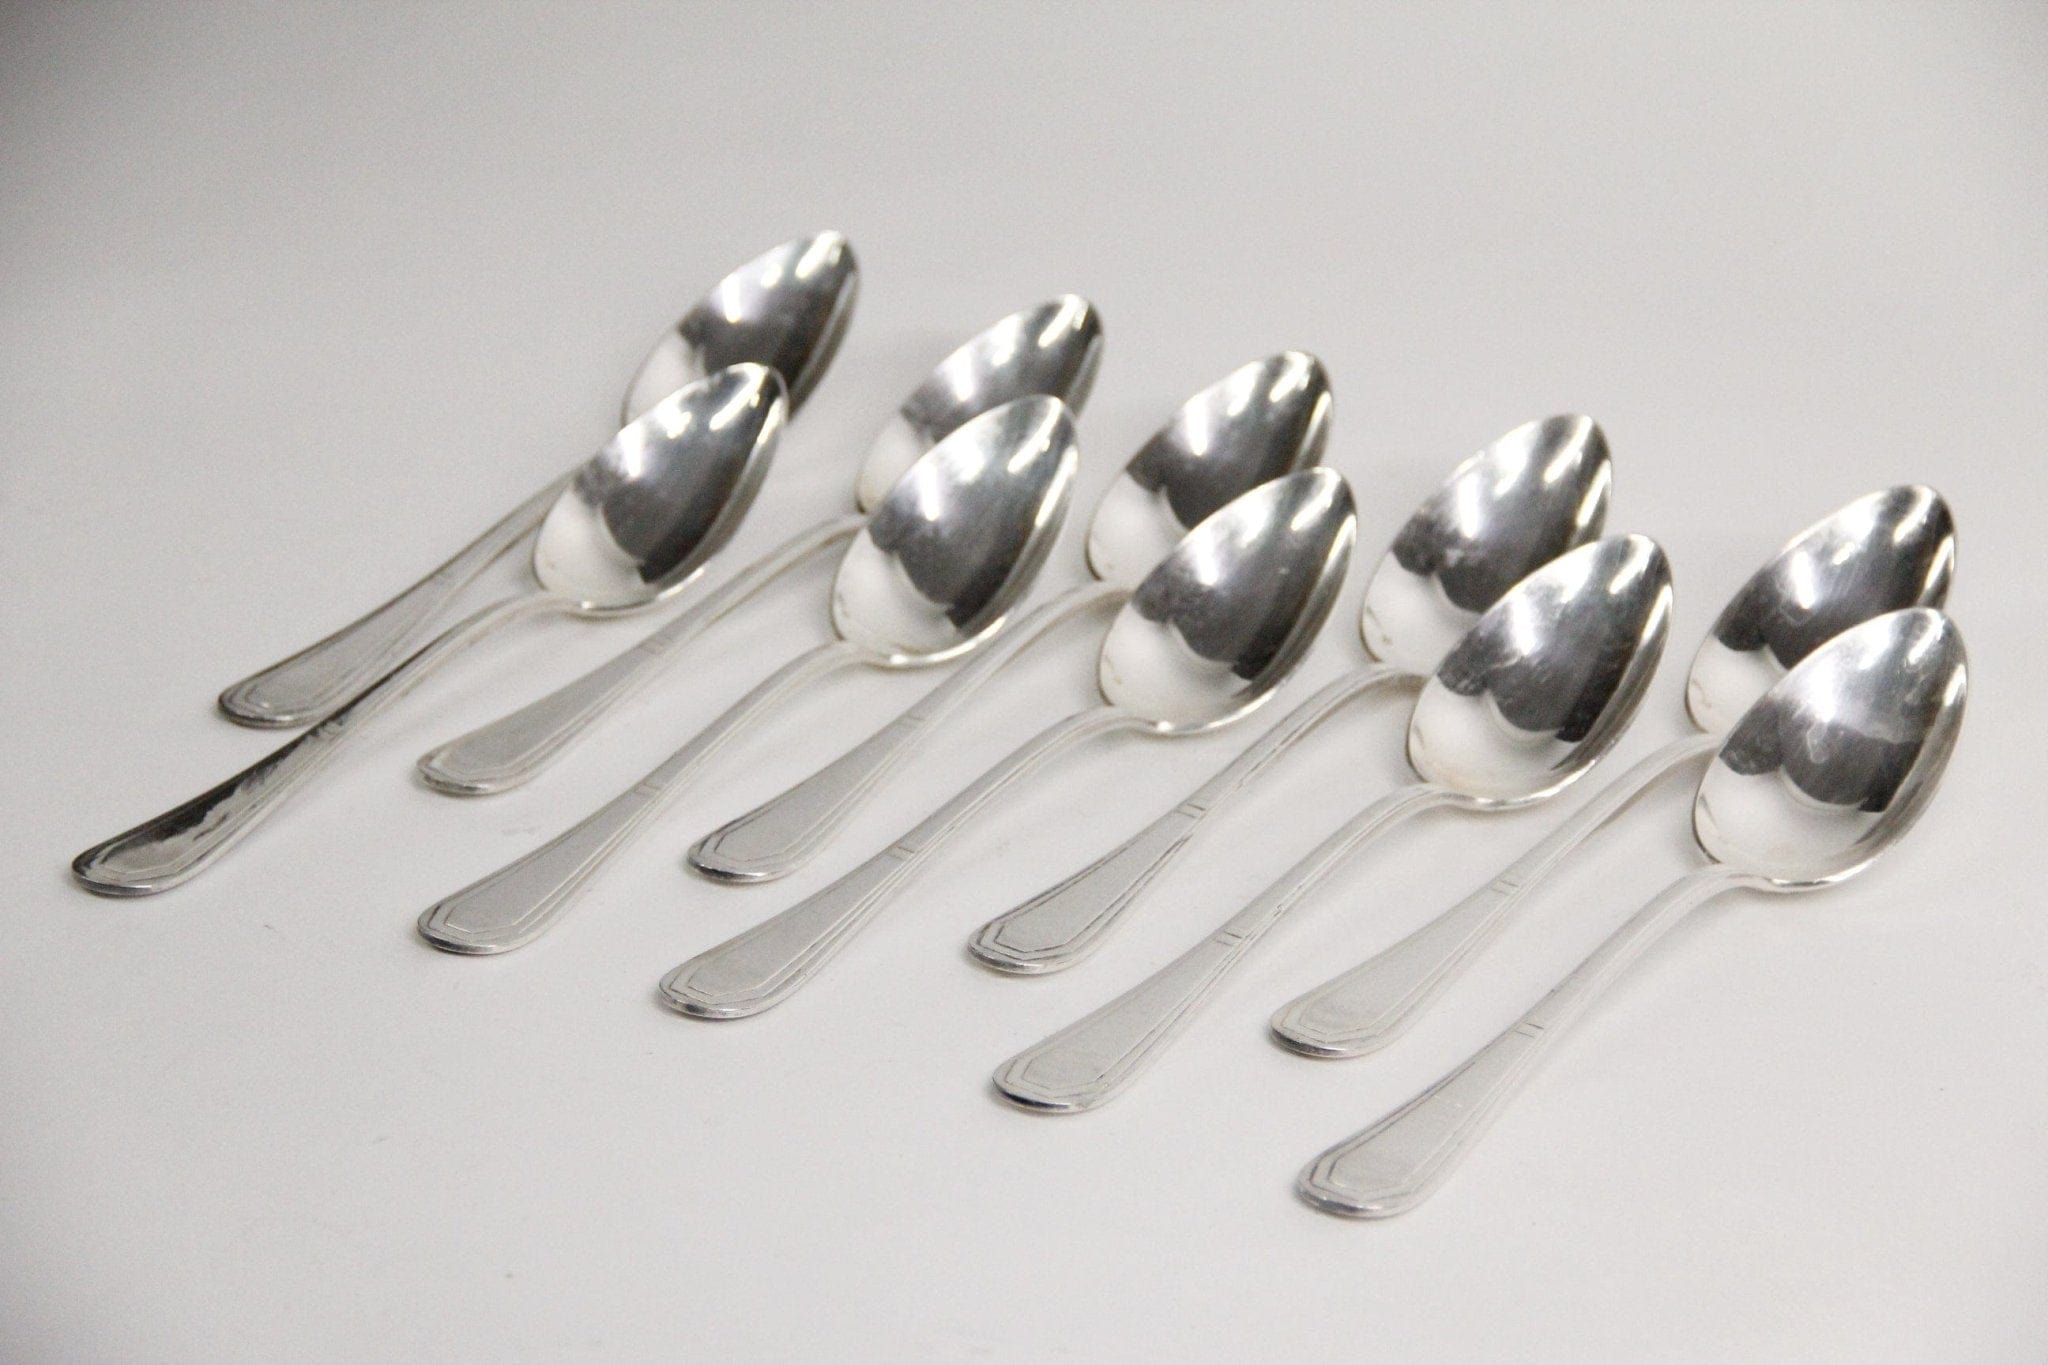 Vintage French Flatware | Tablespoons - Debra Hall Lifestyle